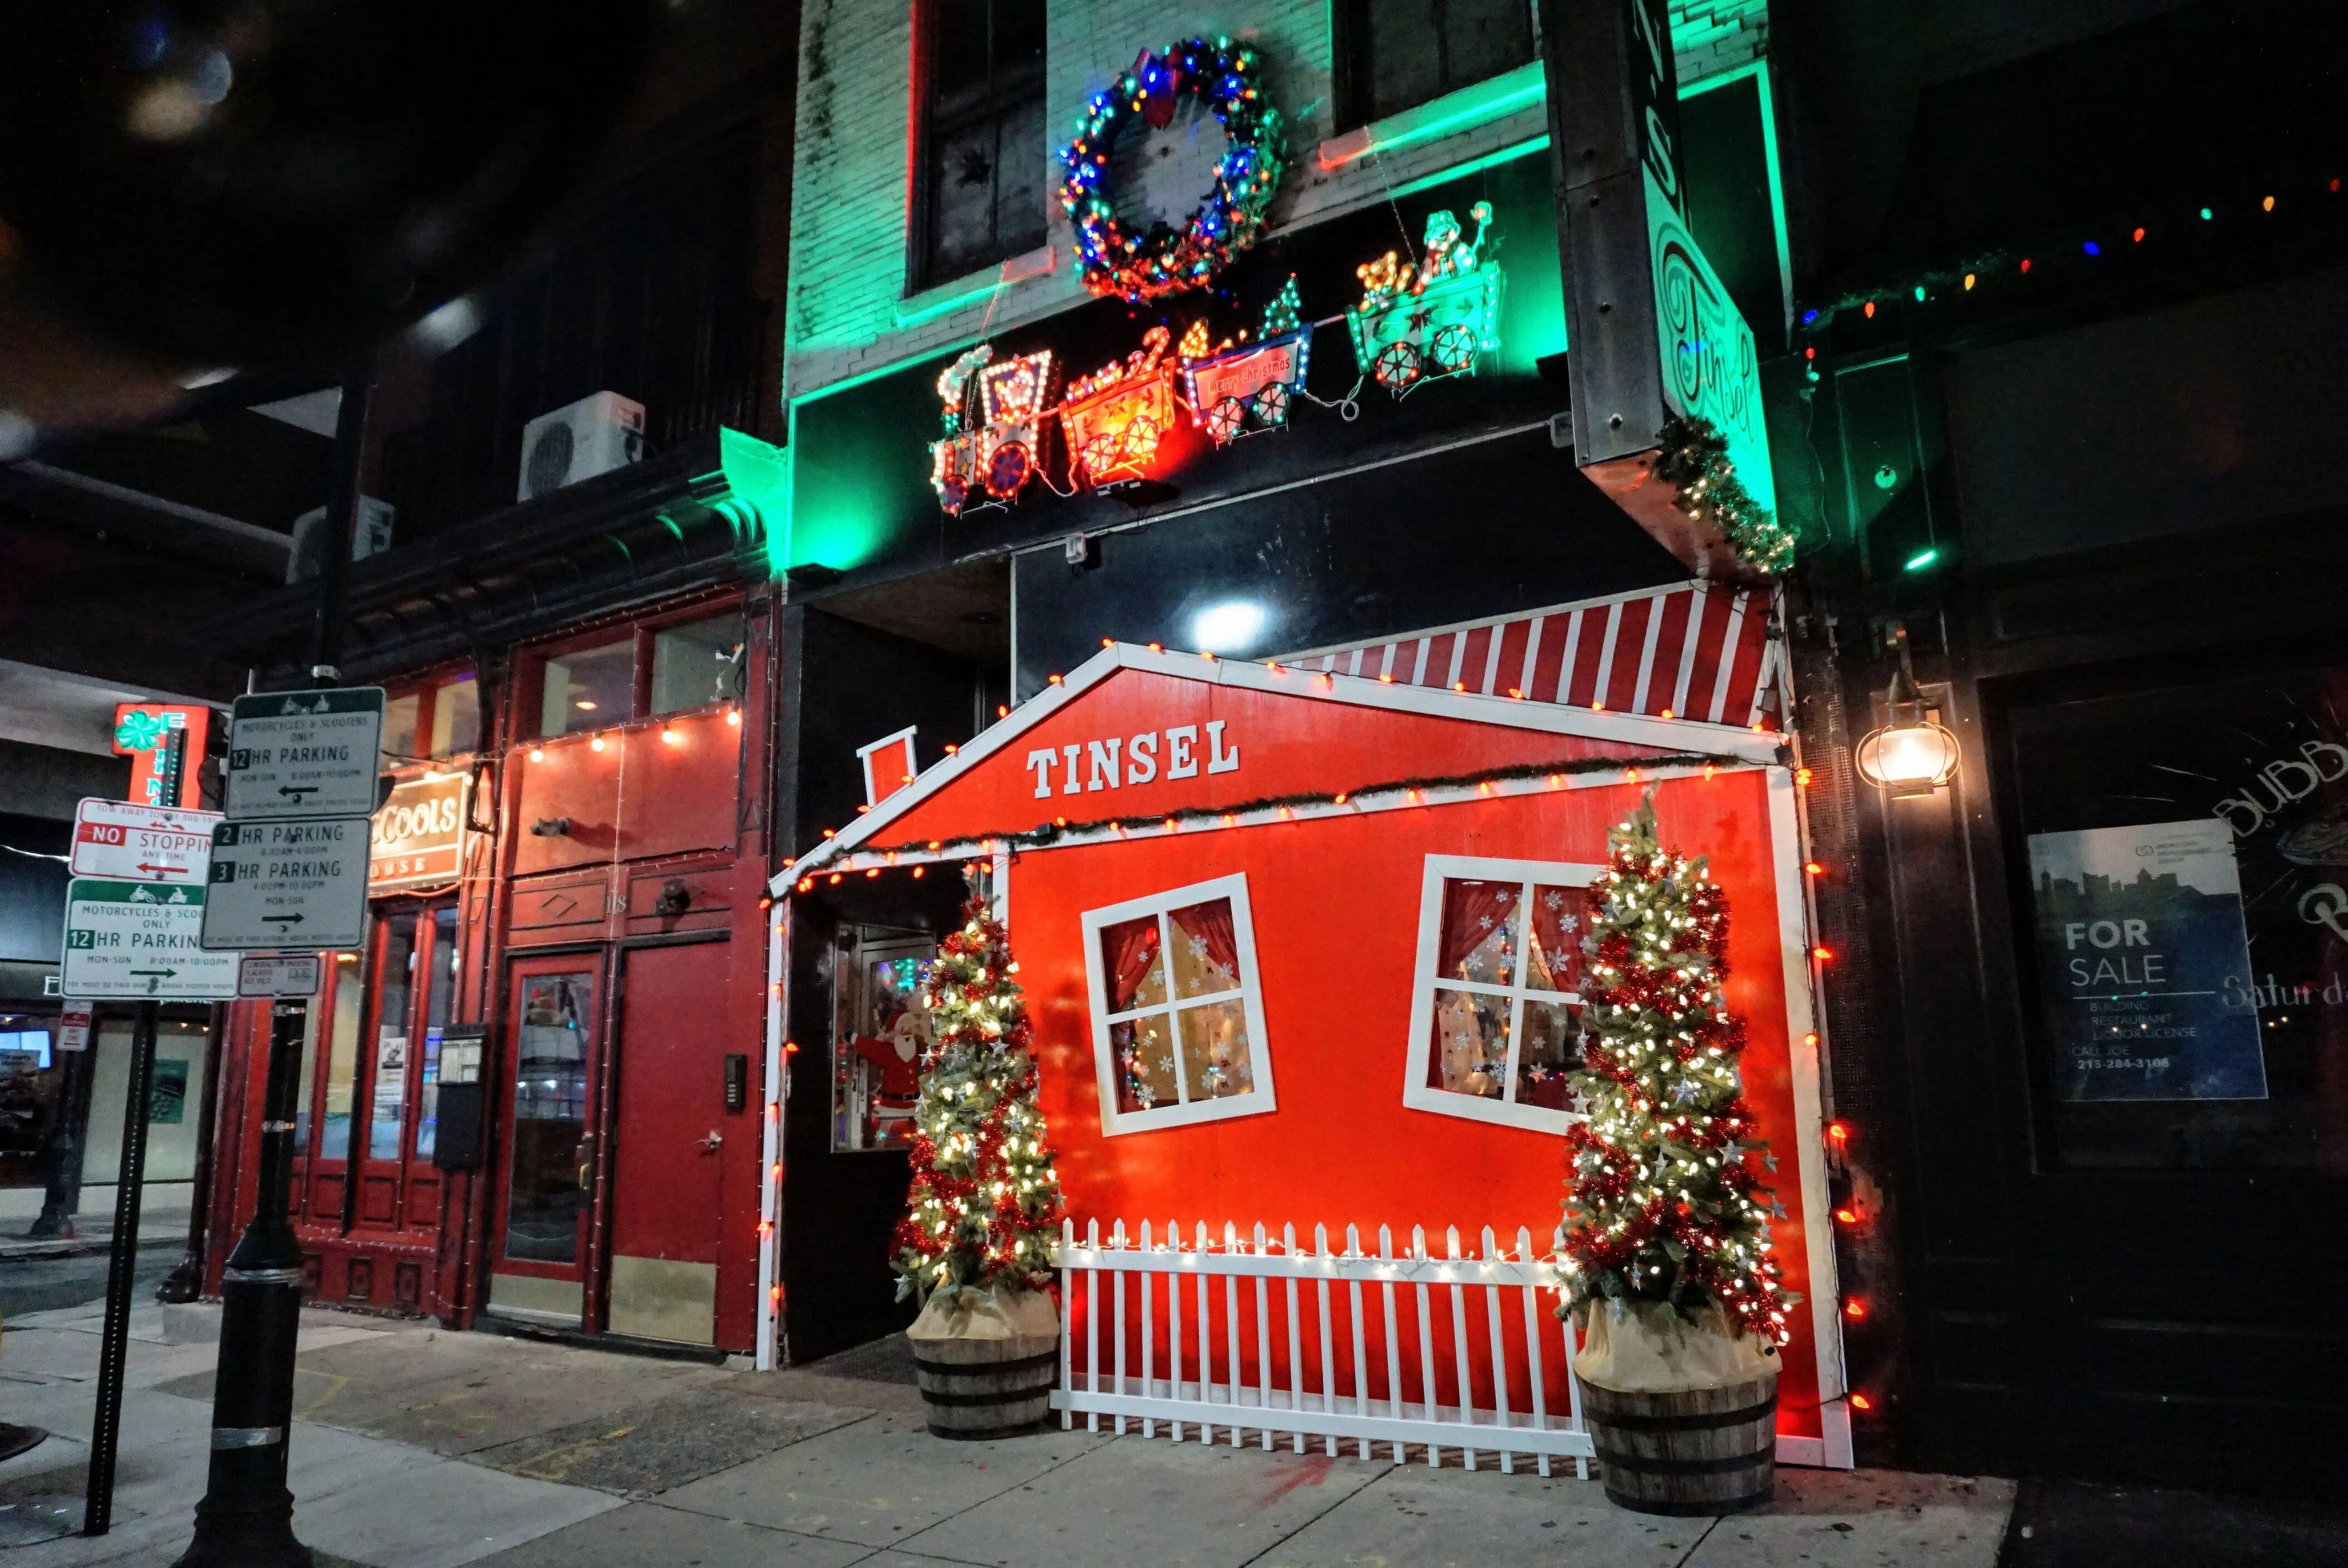 12th Street Tavern – Open Daily: 11:00AM – 10:00PM